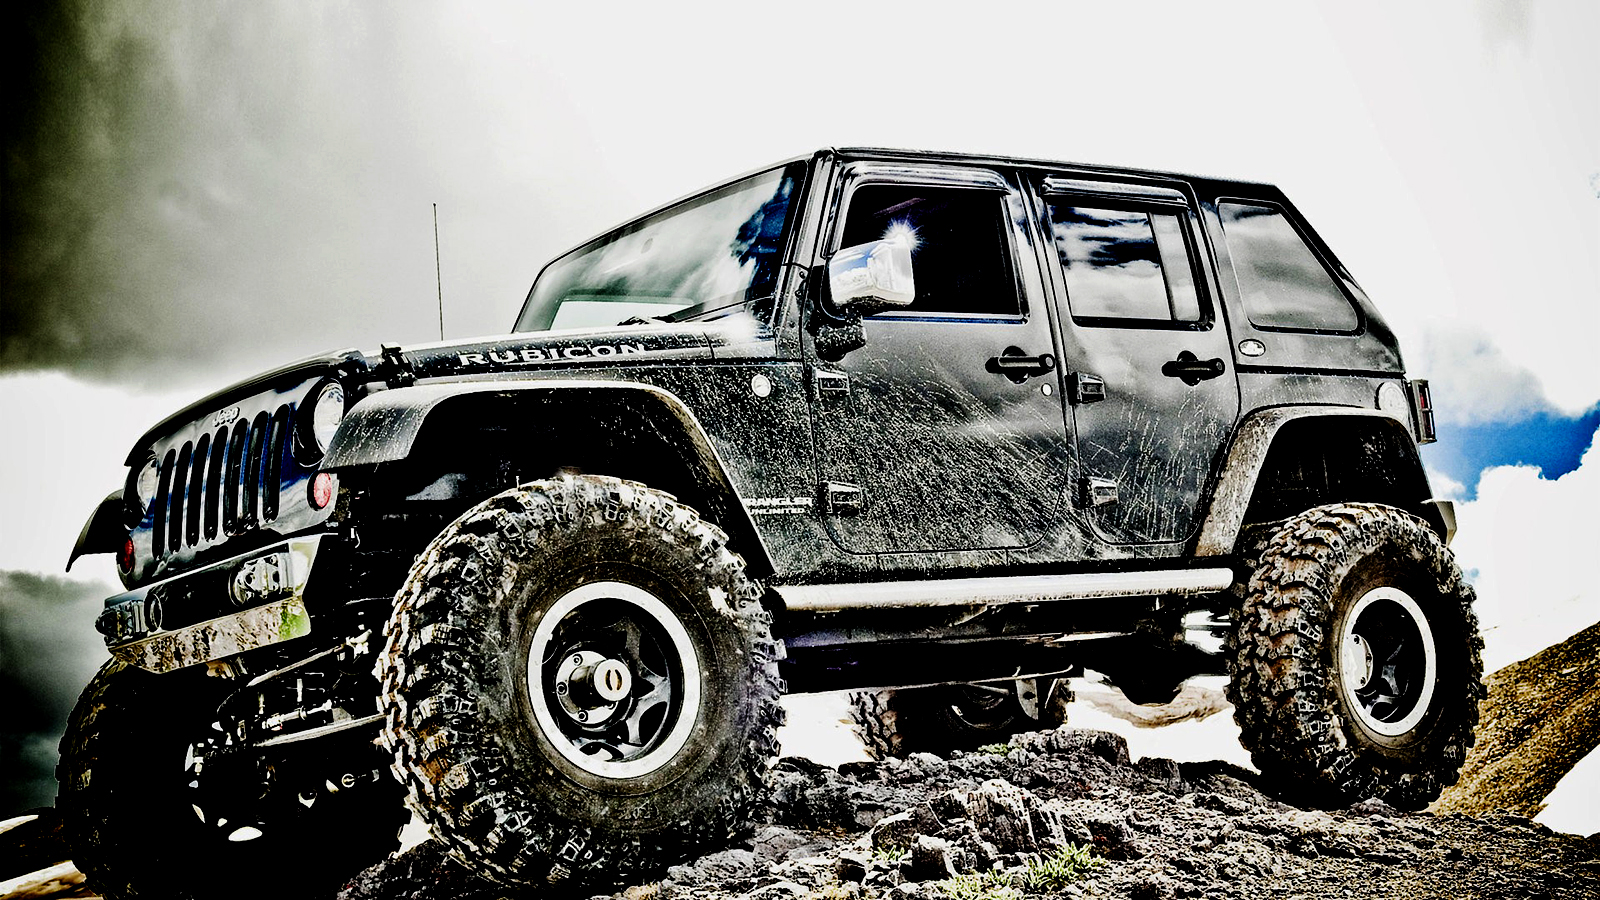 Best Offroading Background